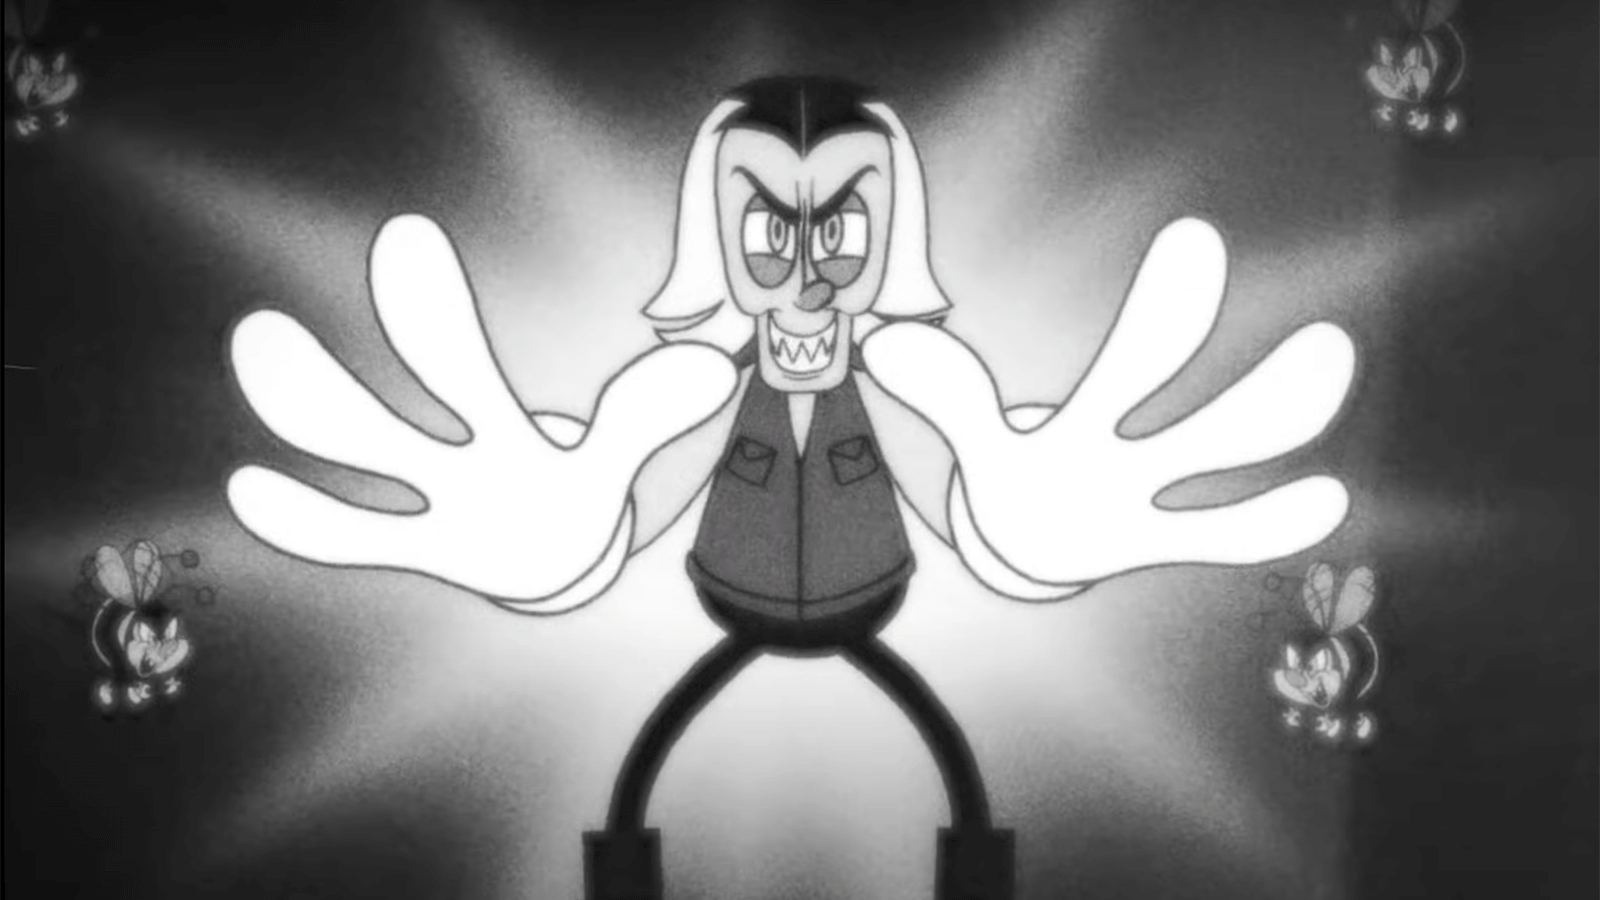 GHOSTEMANE RELEASES ANIMATED MUSIC VIDEO FOR NEW SINGLE “AI”